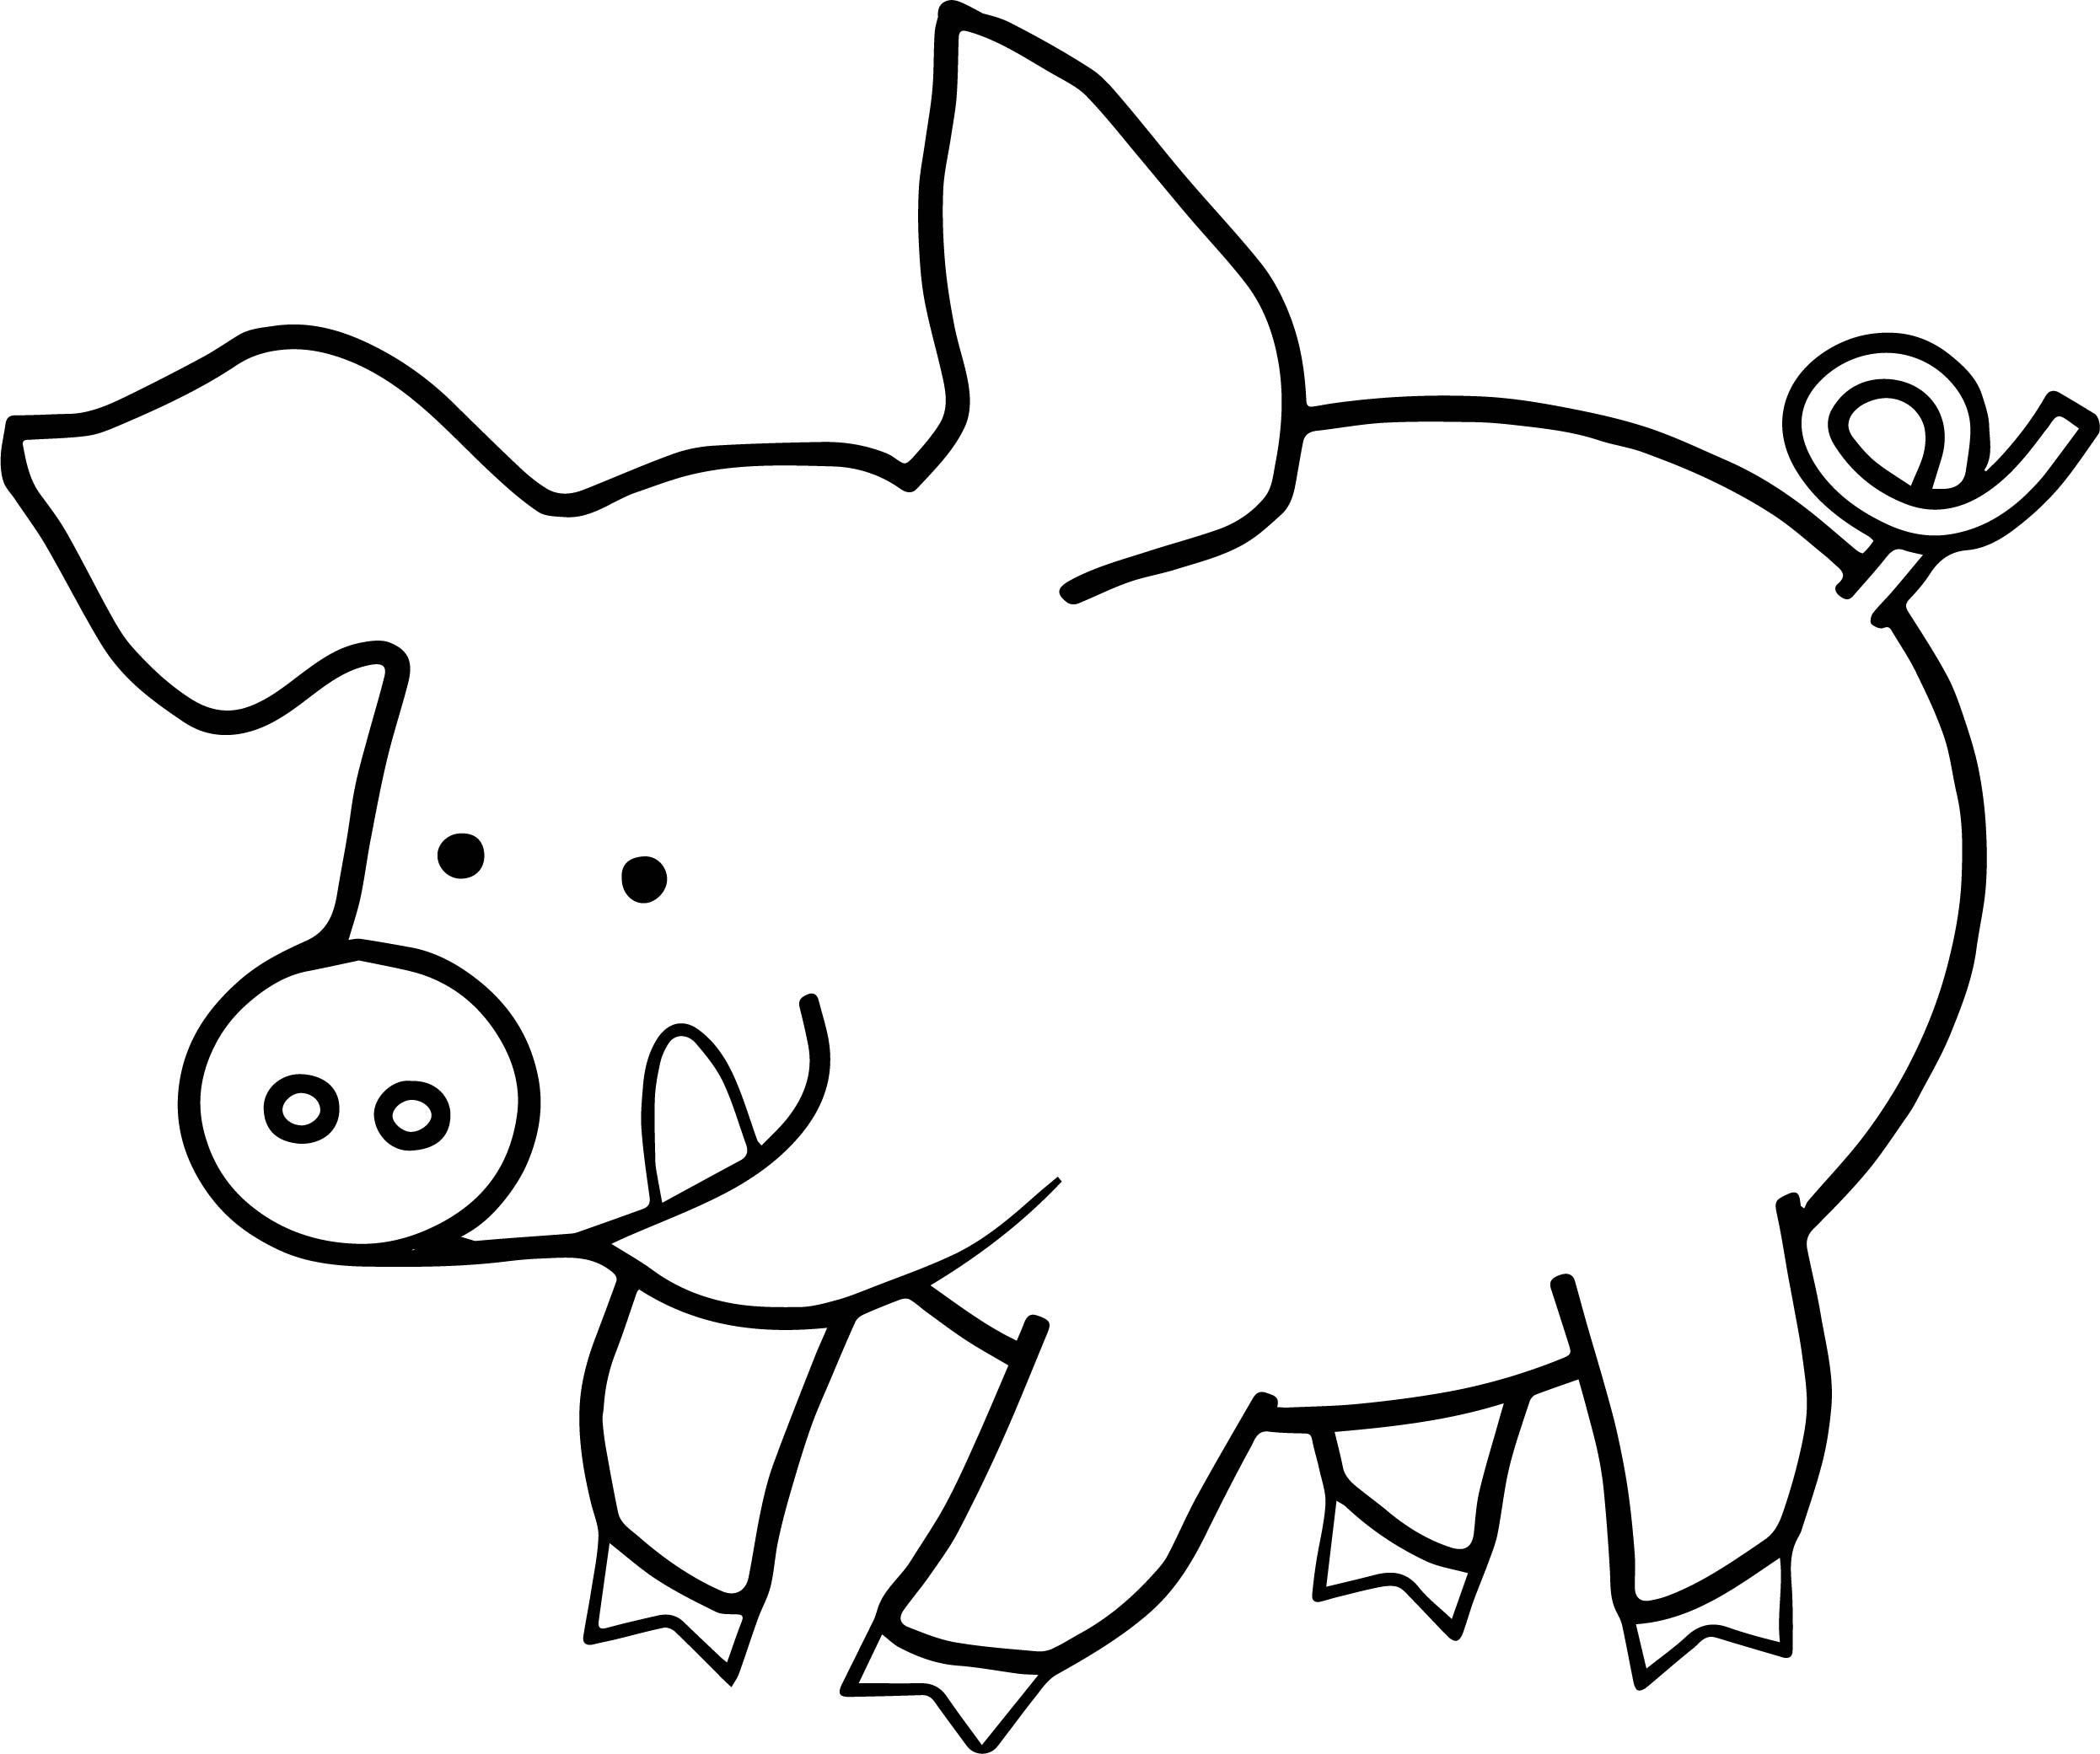 Alpha Pig Coloring Pages at Free printable colorings